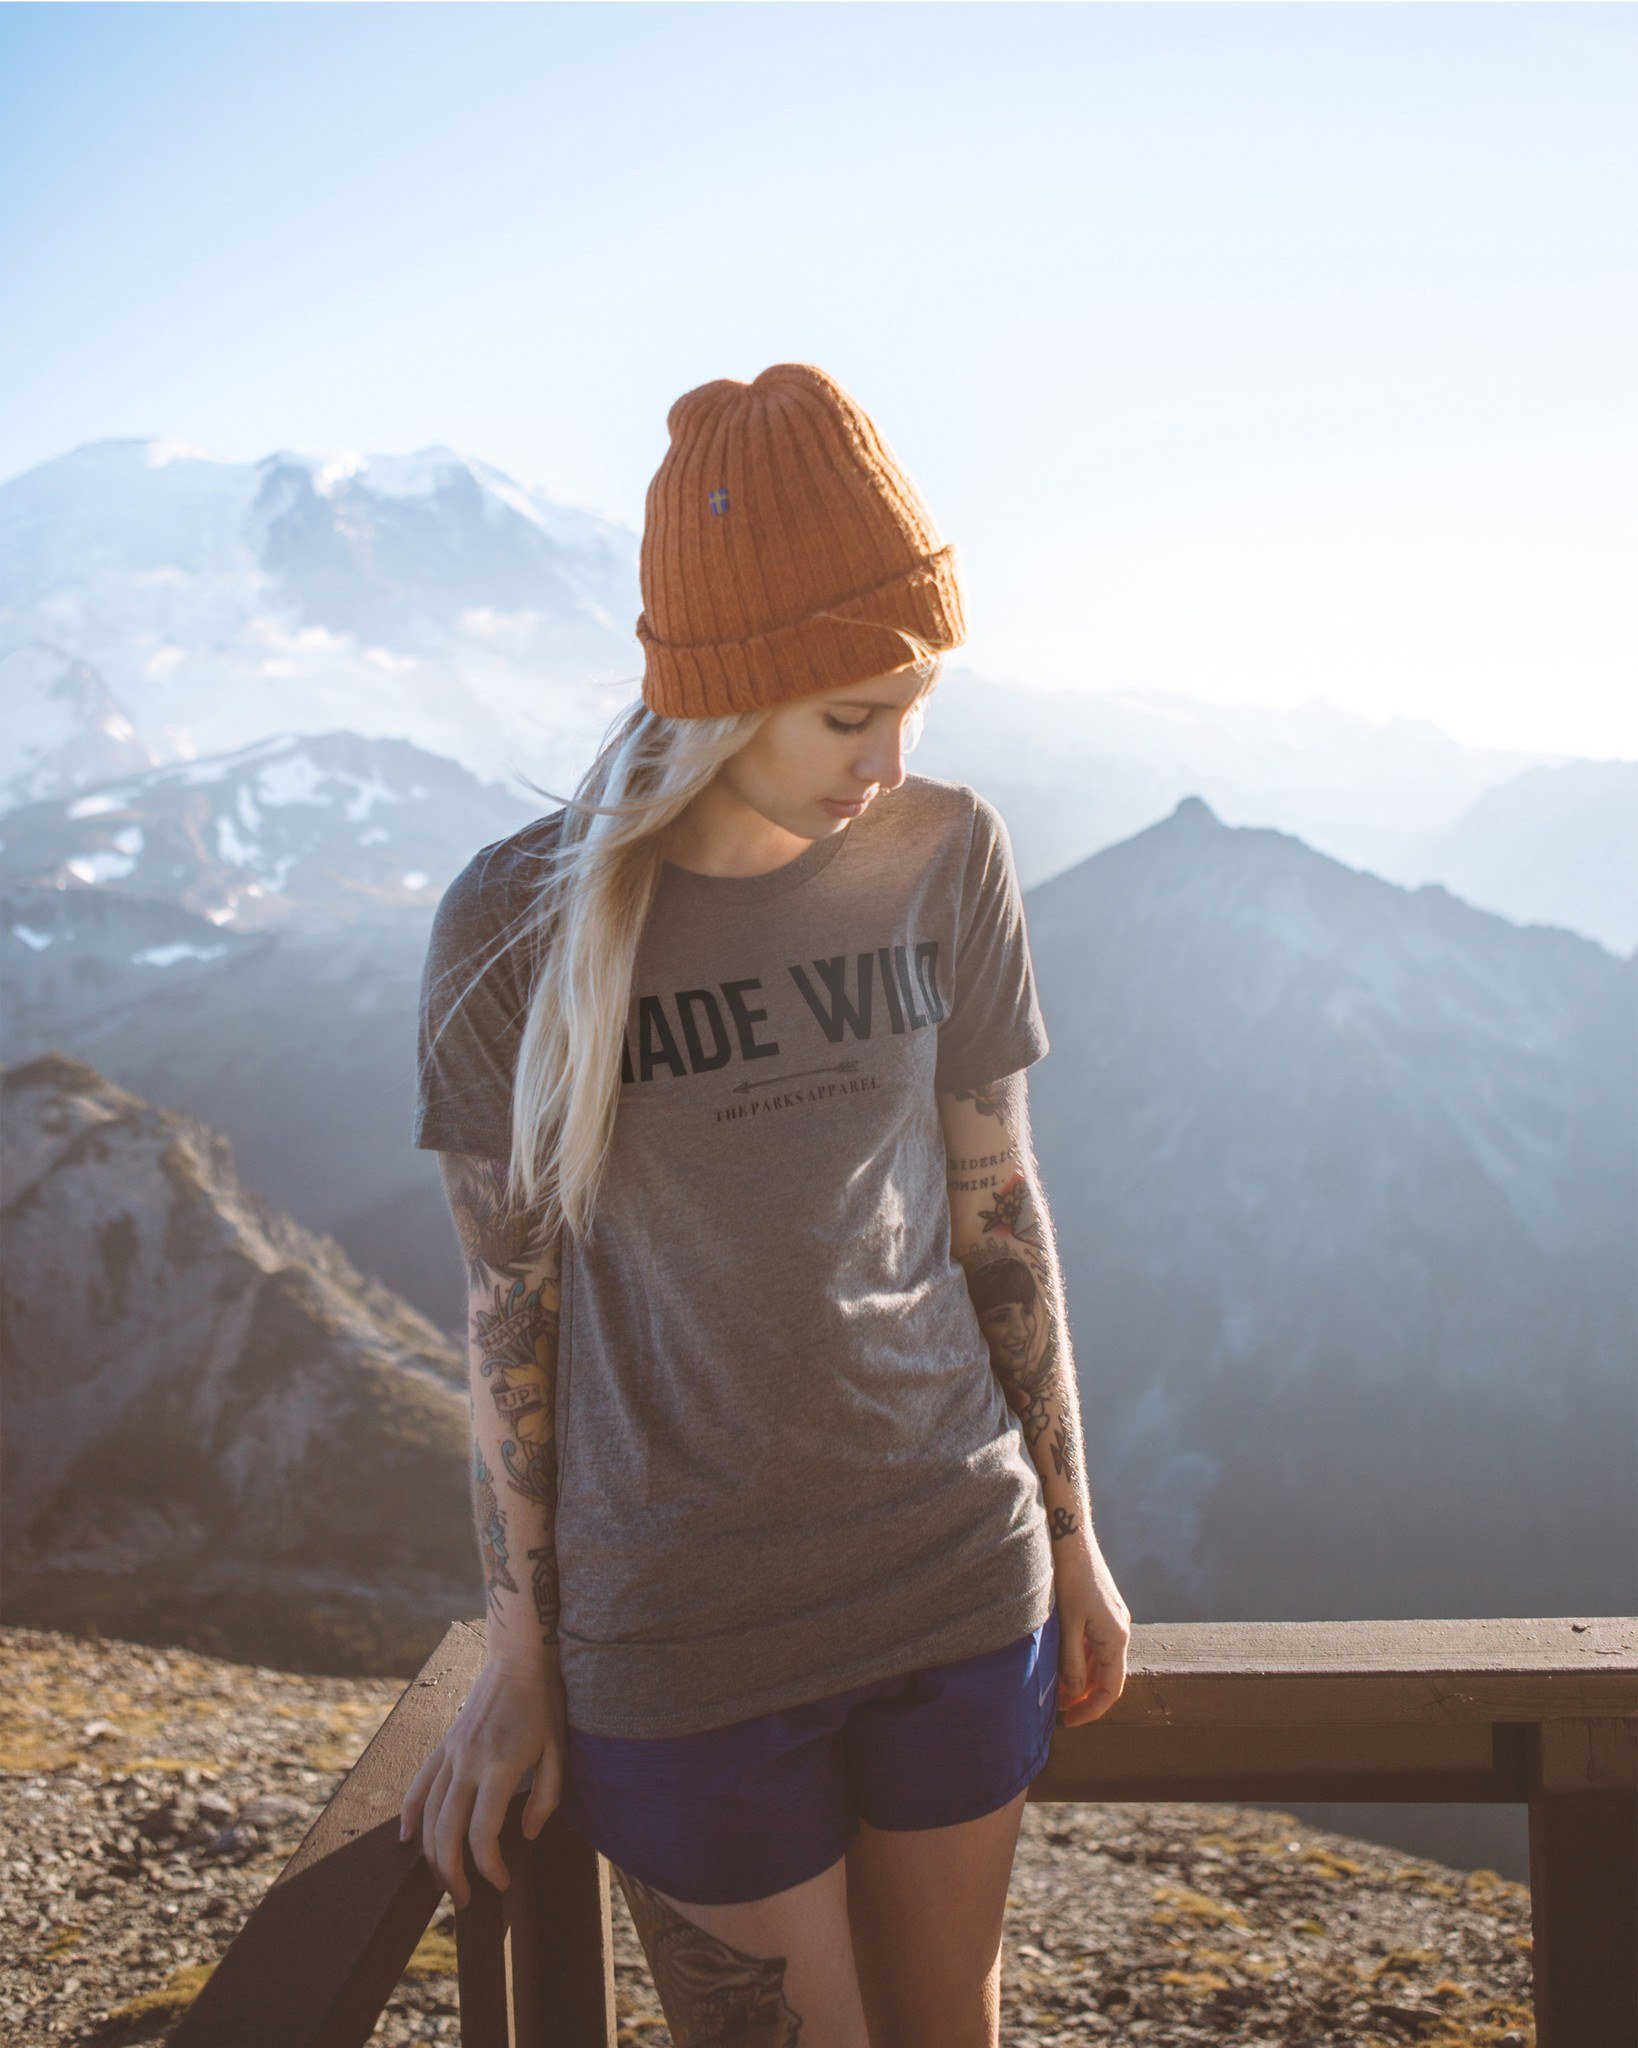 The Parks Made Wild Tee – The Parks Apparel